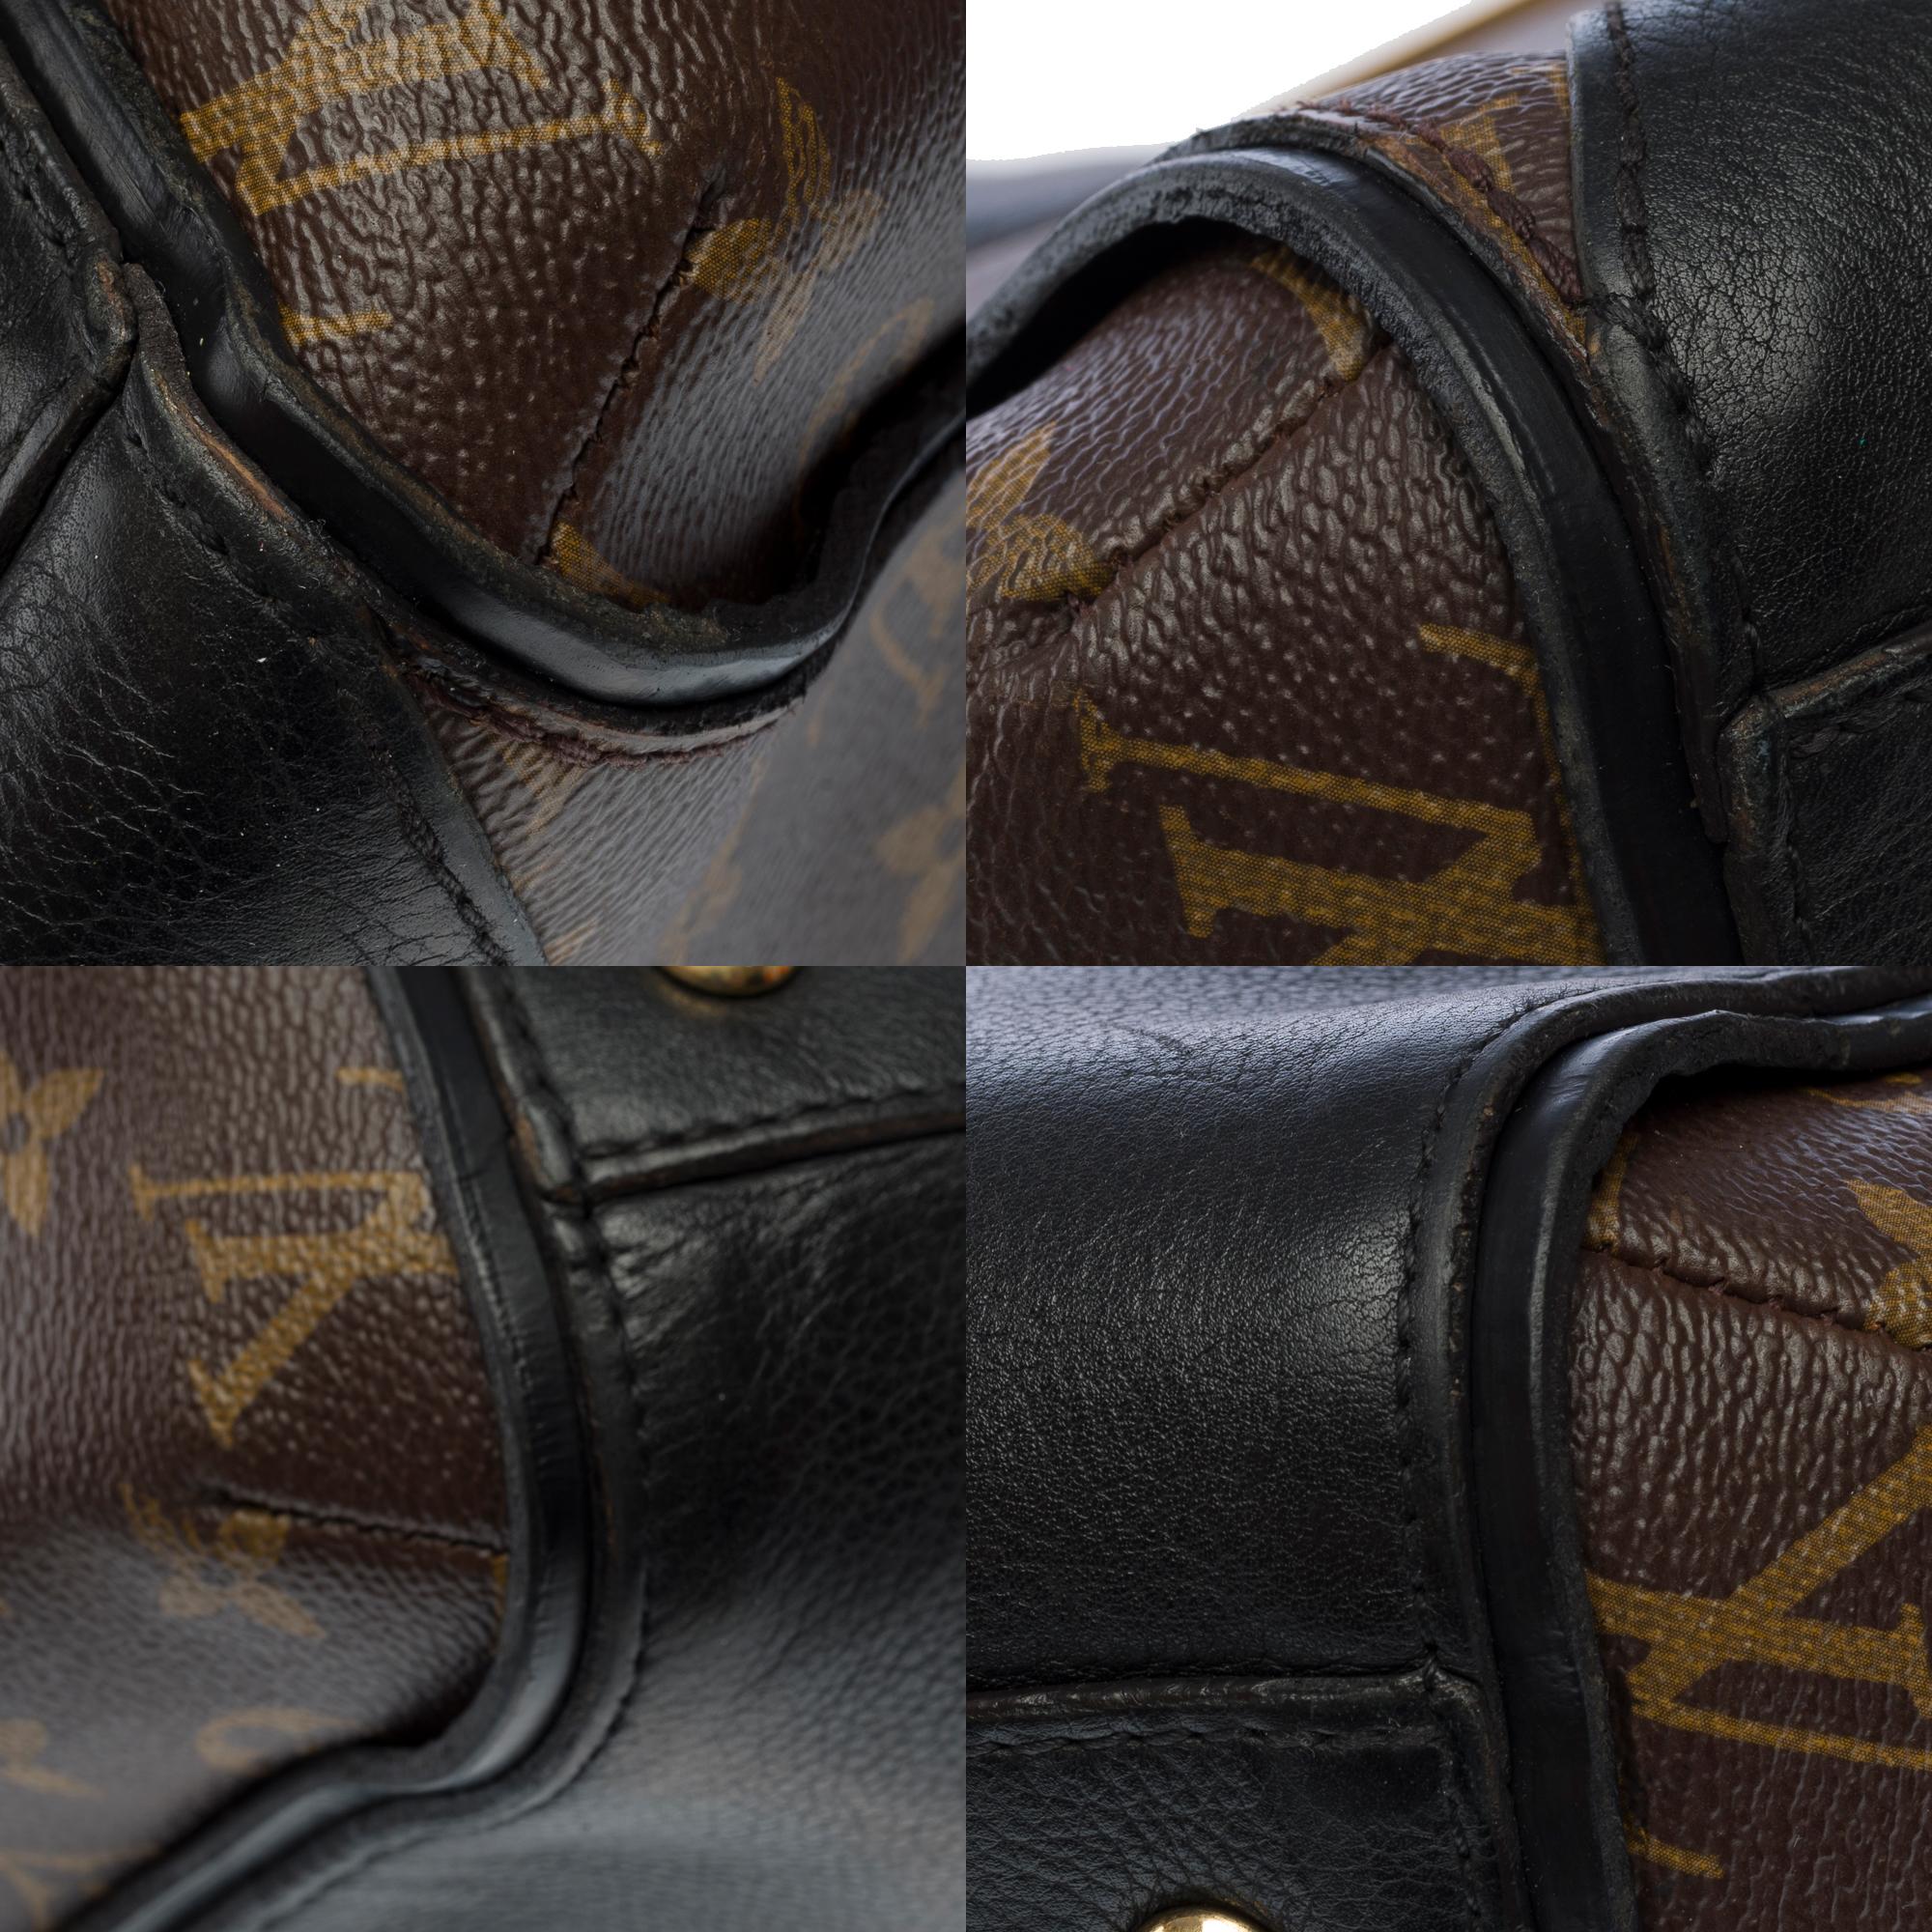 Louis Vuitton Kimono Tote bag in brown monogram canvas and black leather, GHW For Sale 7